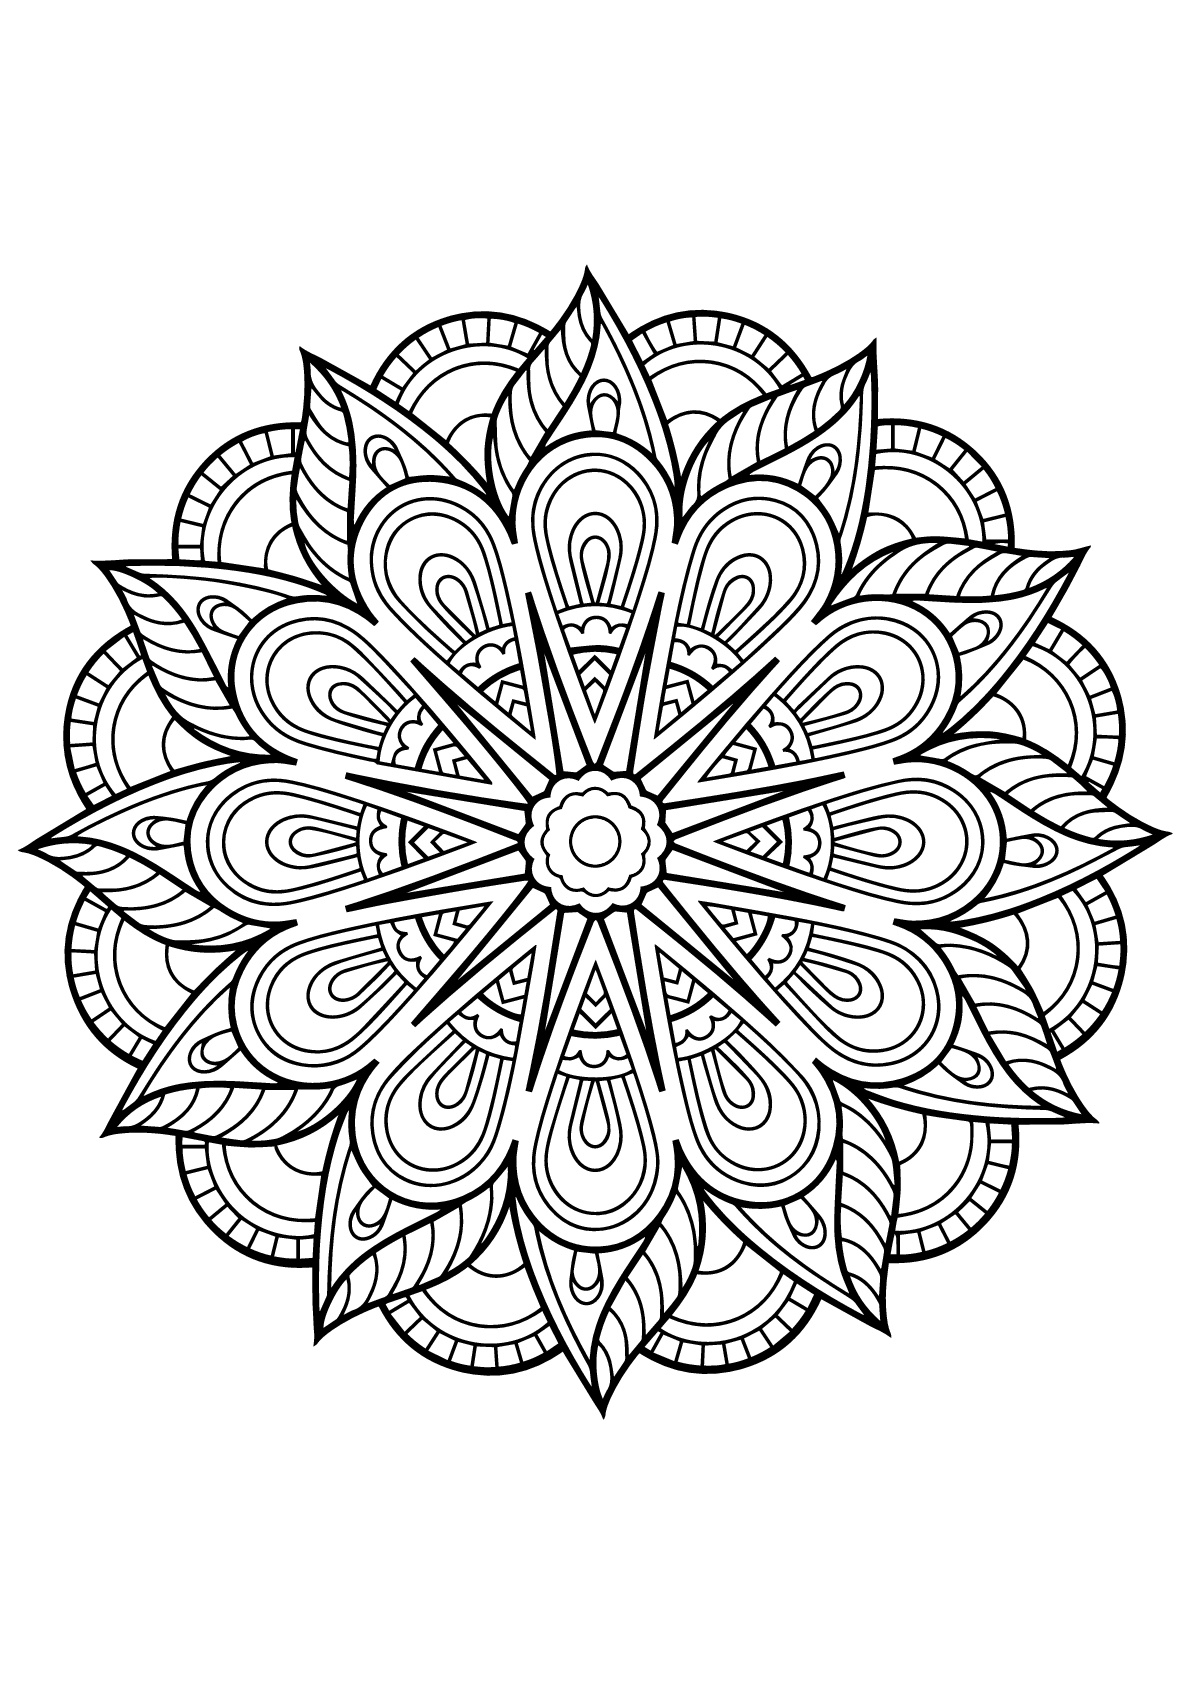 Mandala from free coloring books for adults - 1 - Mandalas Adult Coloring  Pages